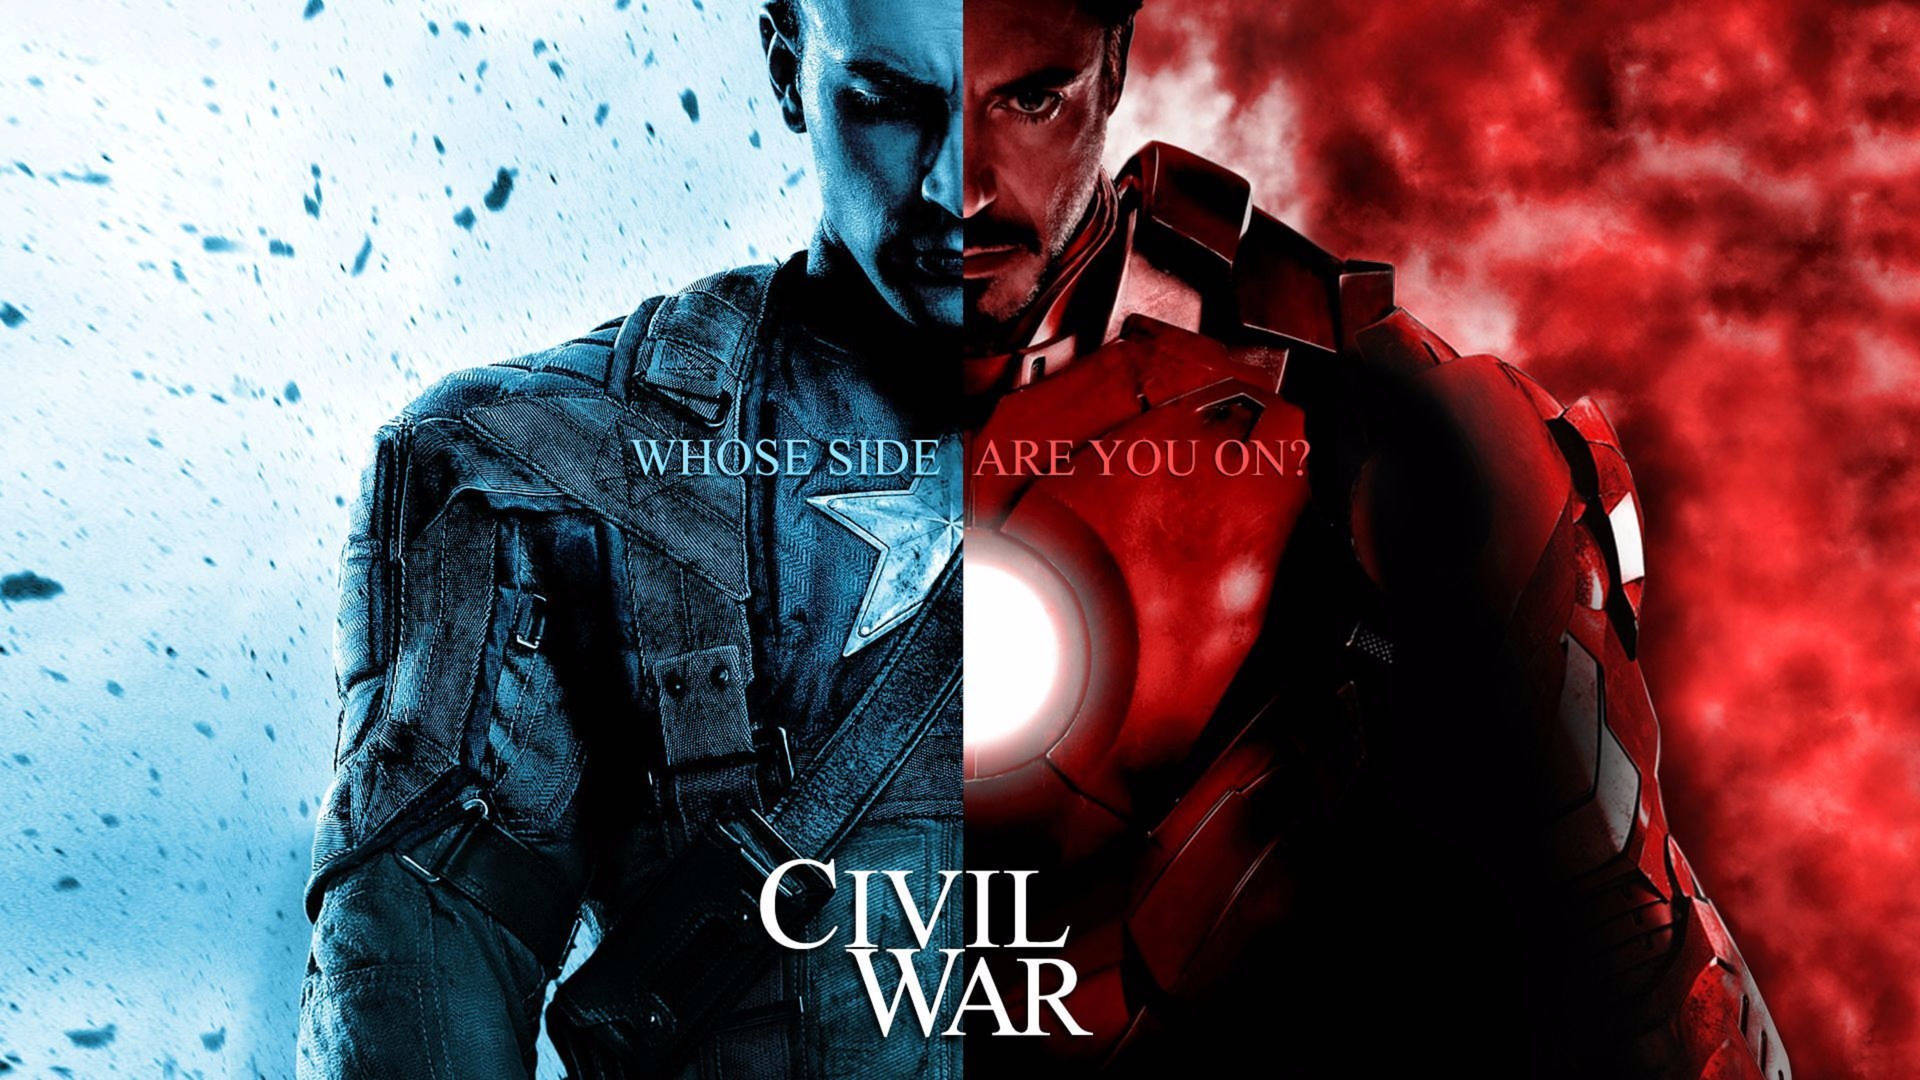 Captain America and Iron Man face off in a climactic battle from Marvel's Captain America: Civil War Wallpaper